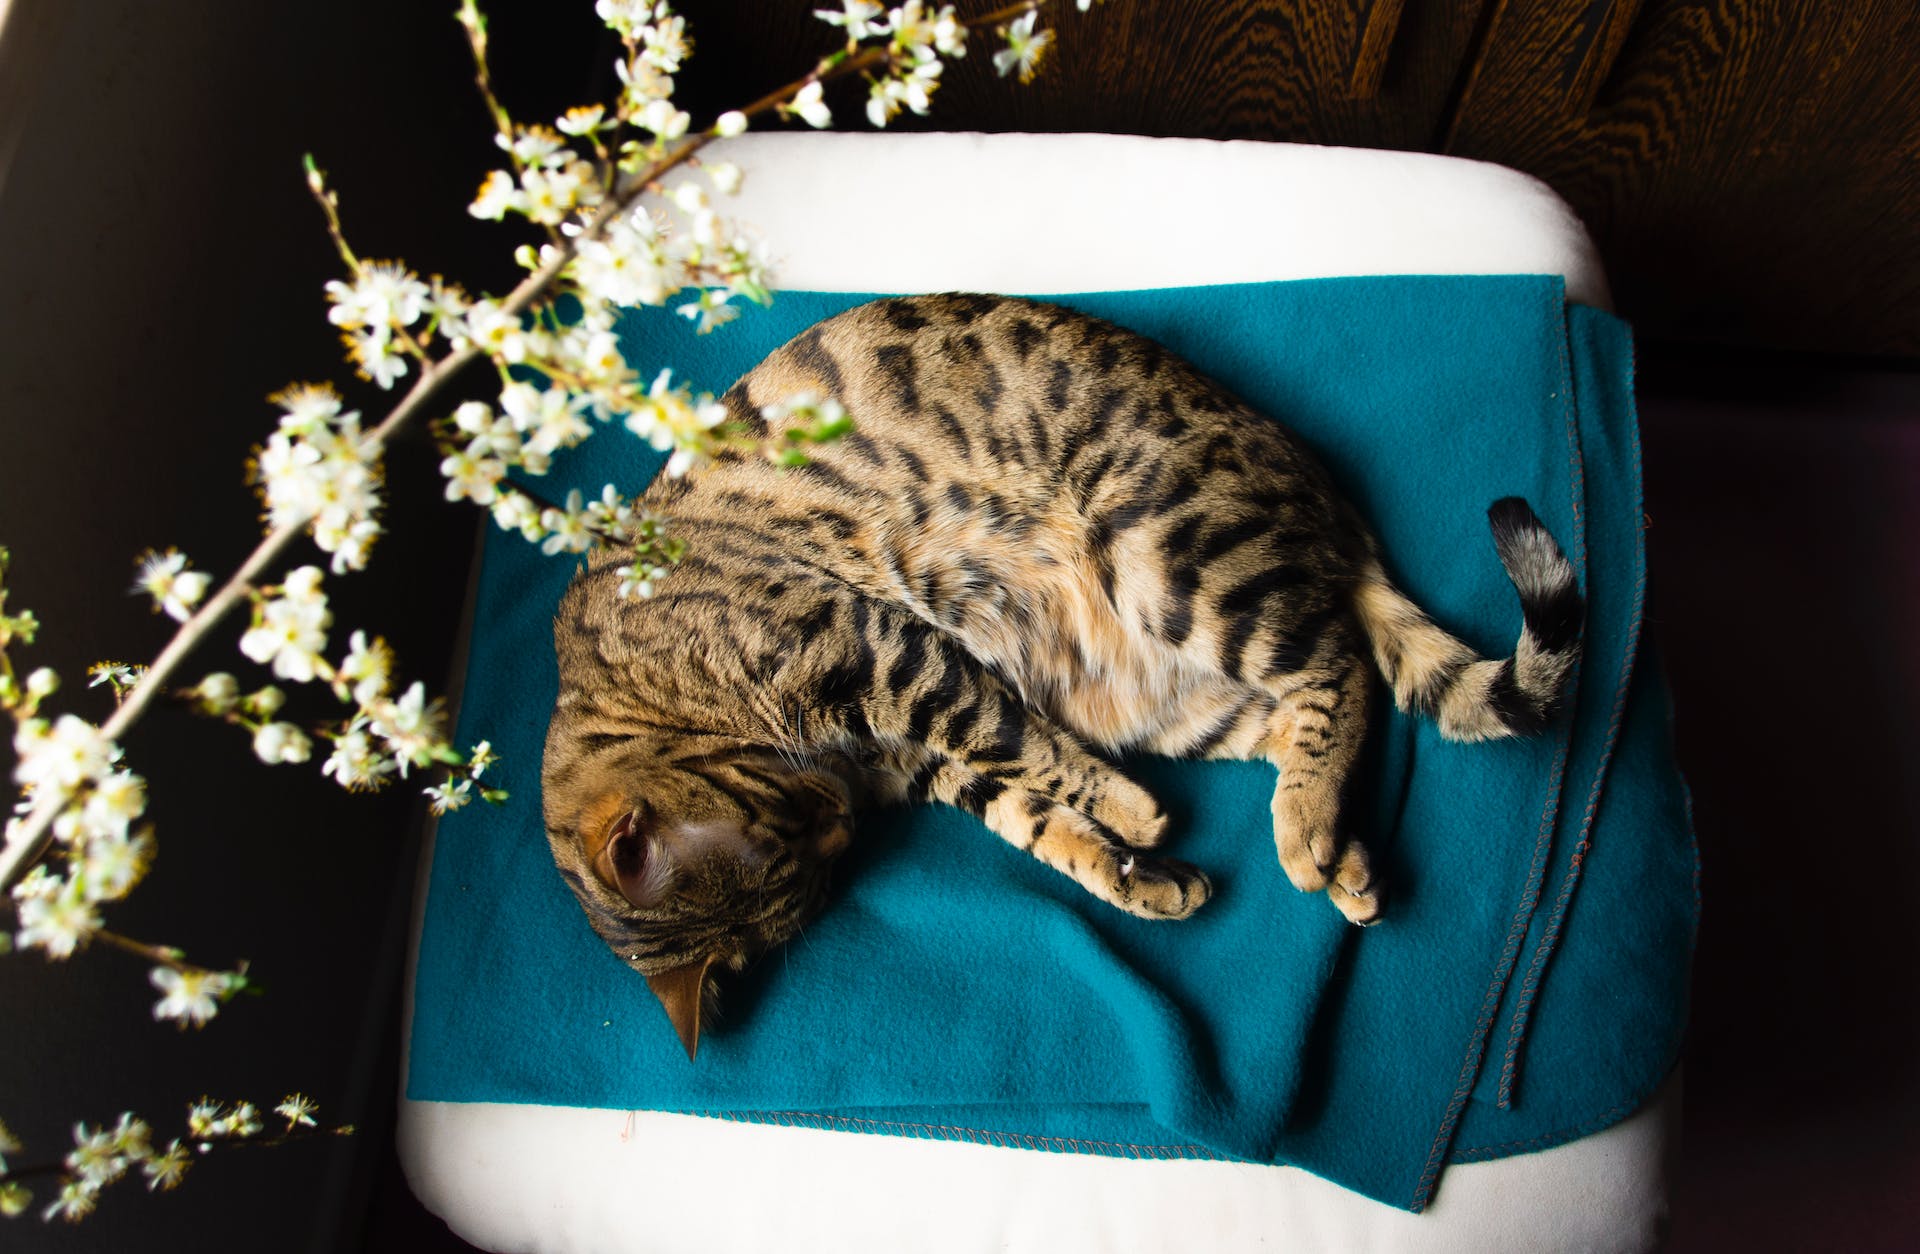 A cat lying on a blue blanket and pillow